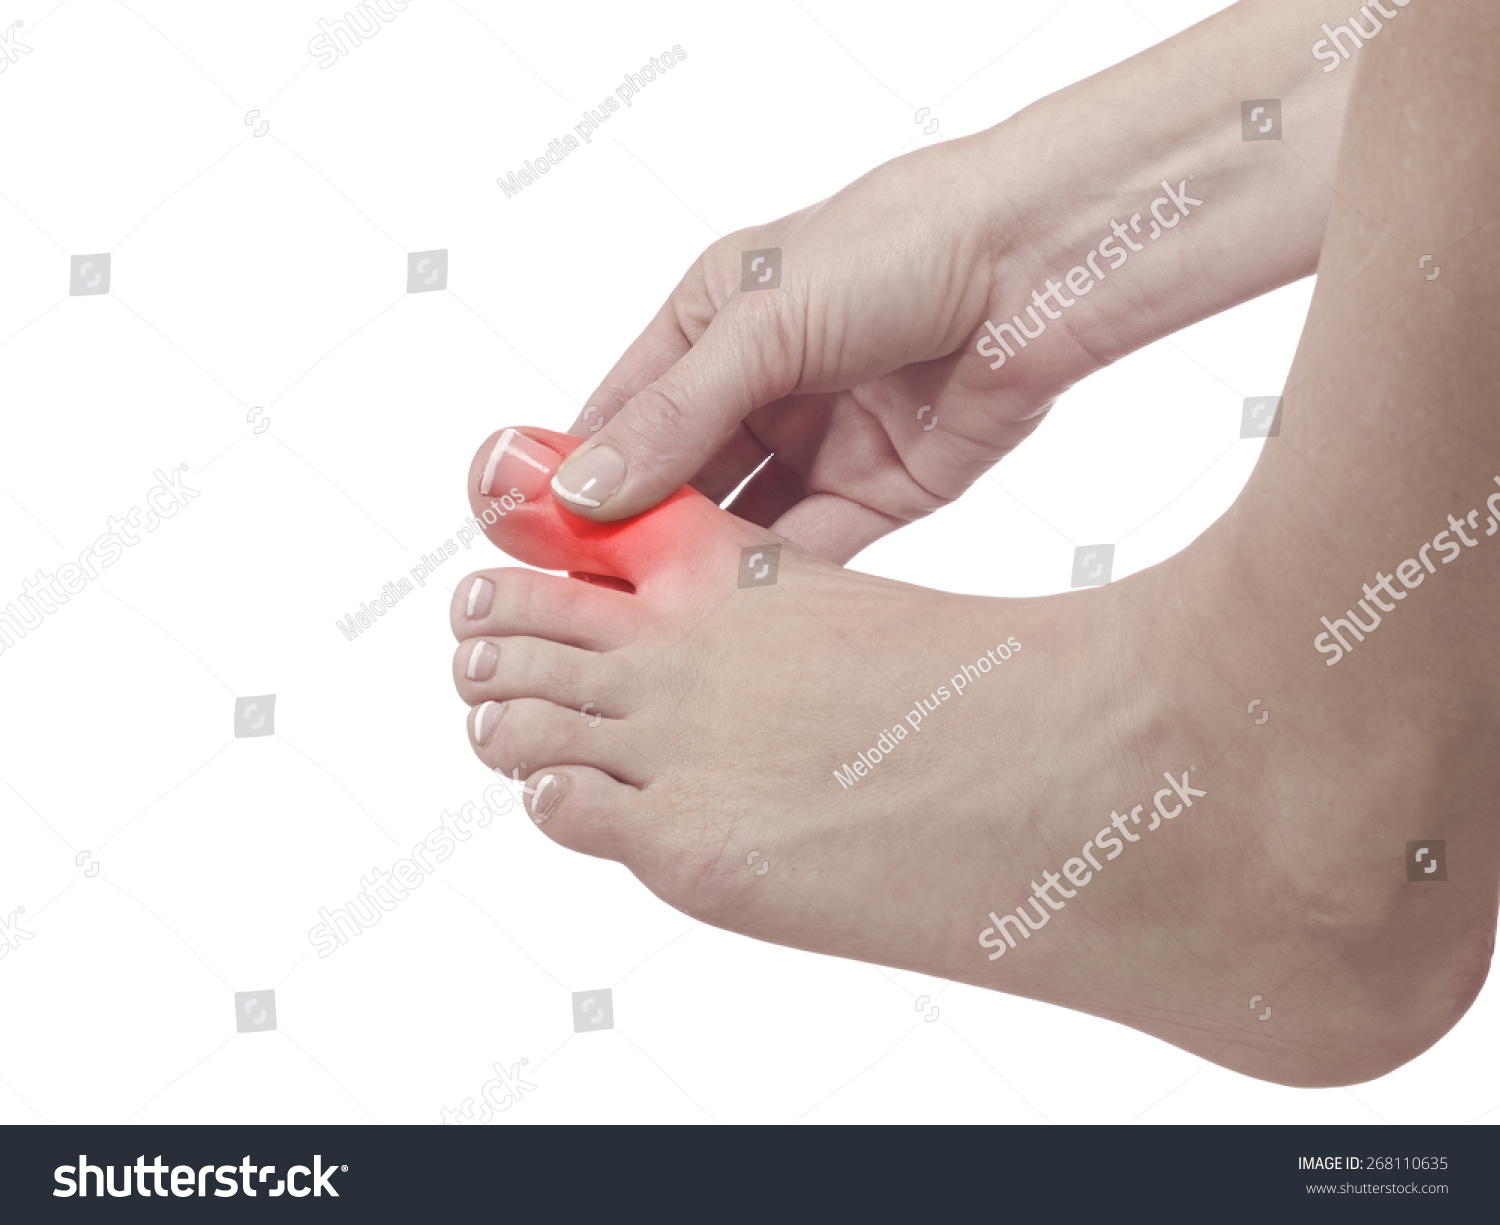 Painful Inflamed Gout On His Foot Stock Photo 268110635 Shutterstock